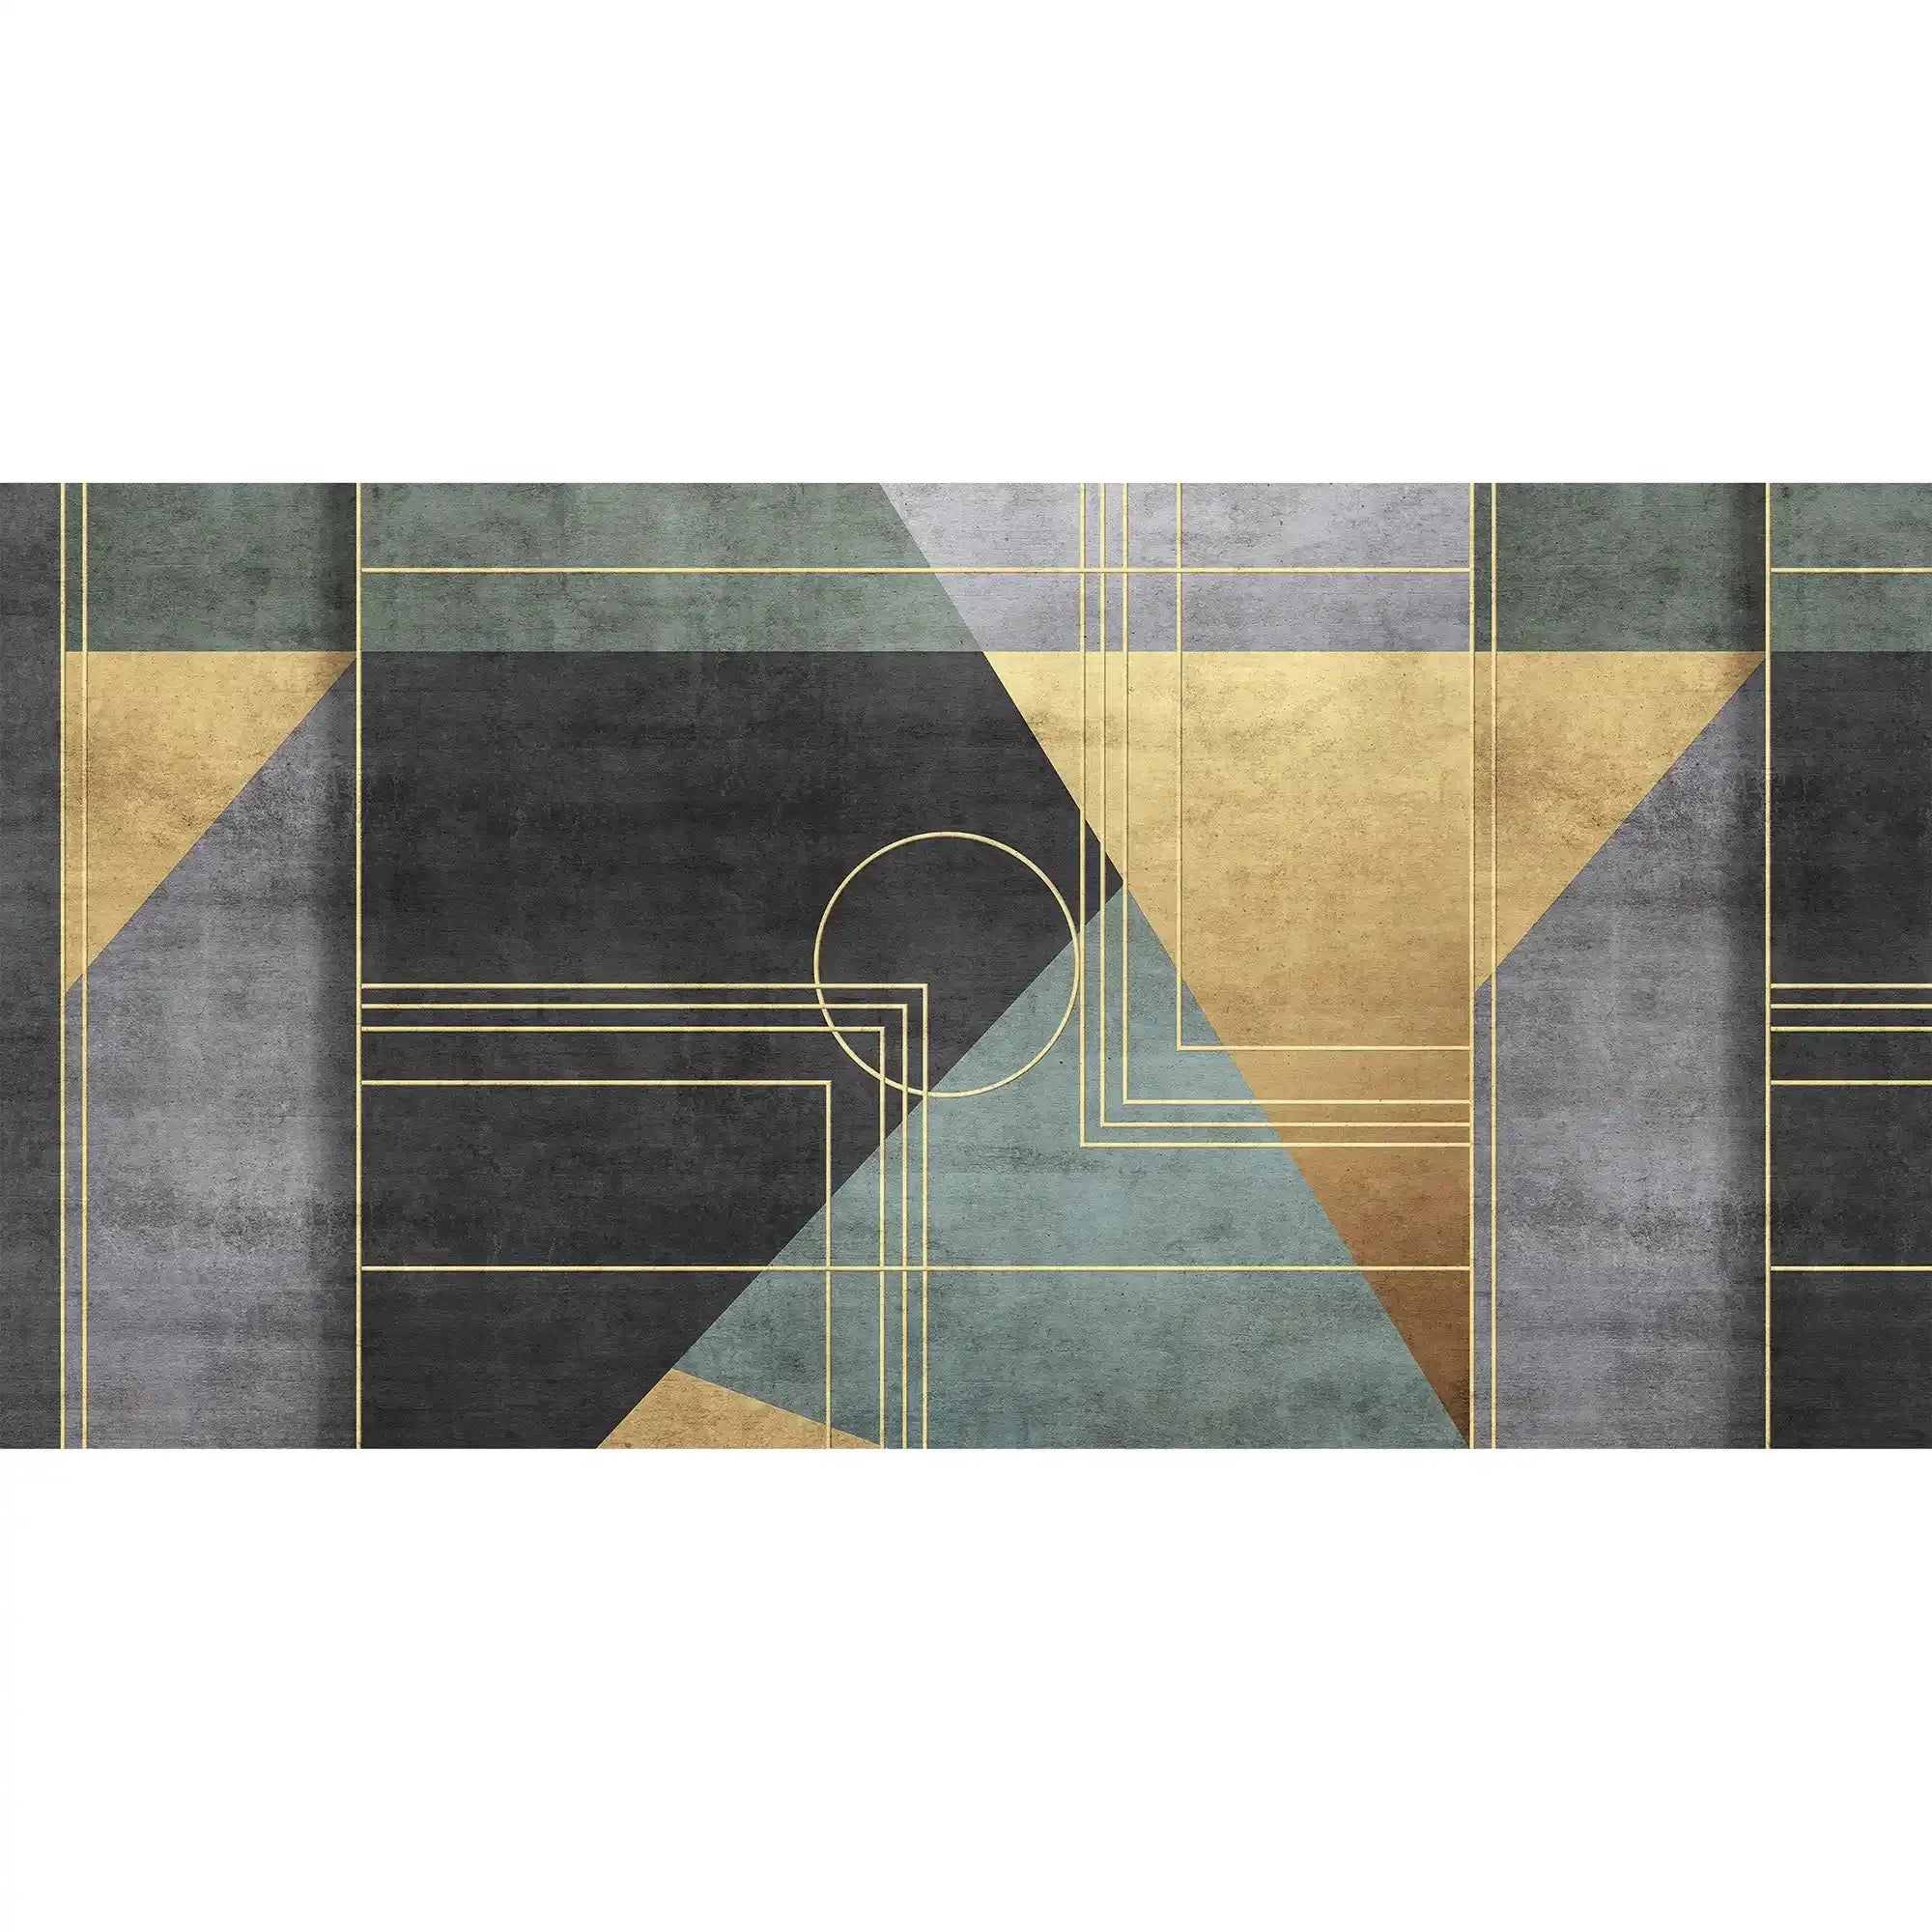 3079-A / Peel and Stick Geometric Wallpaper: Gold Accents, Modern Decor for Walls - DIY Self Adhesive, Removable, Abstract Art Deco Design - Artevella